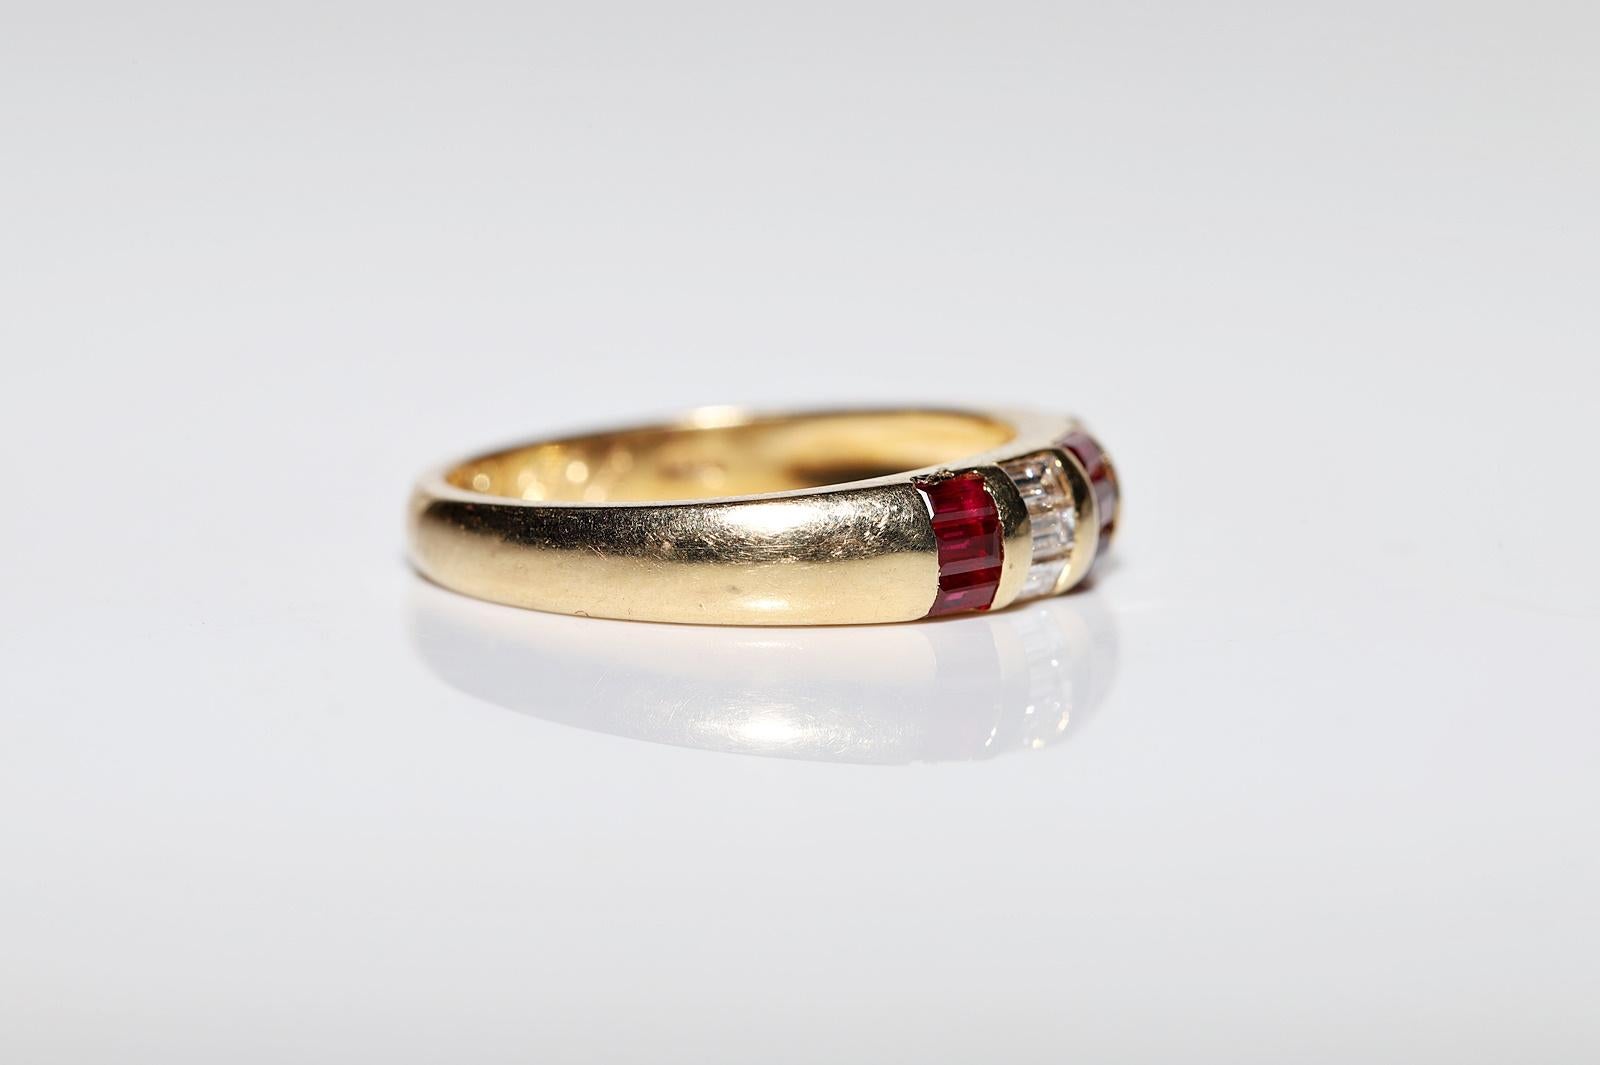 Vintage Circa 1980s 18k Gold Natural Baguette Cut Diamond And Ruby Band Ring  In Good Condition For Sale In Fatih/İstanbul, 34